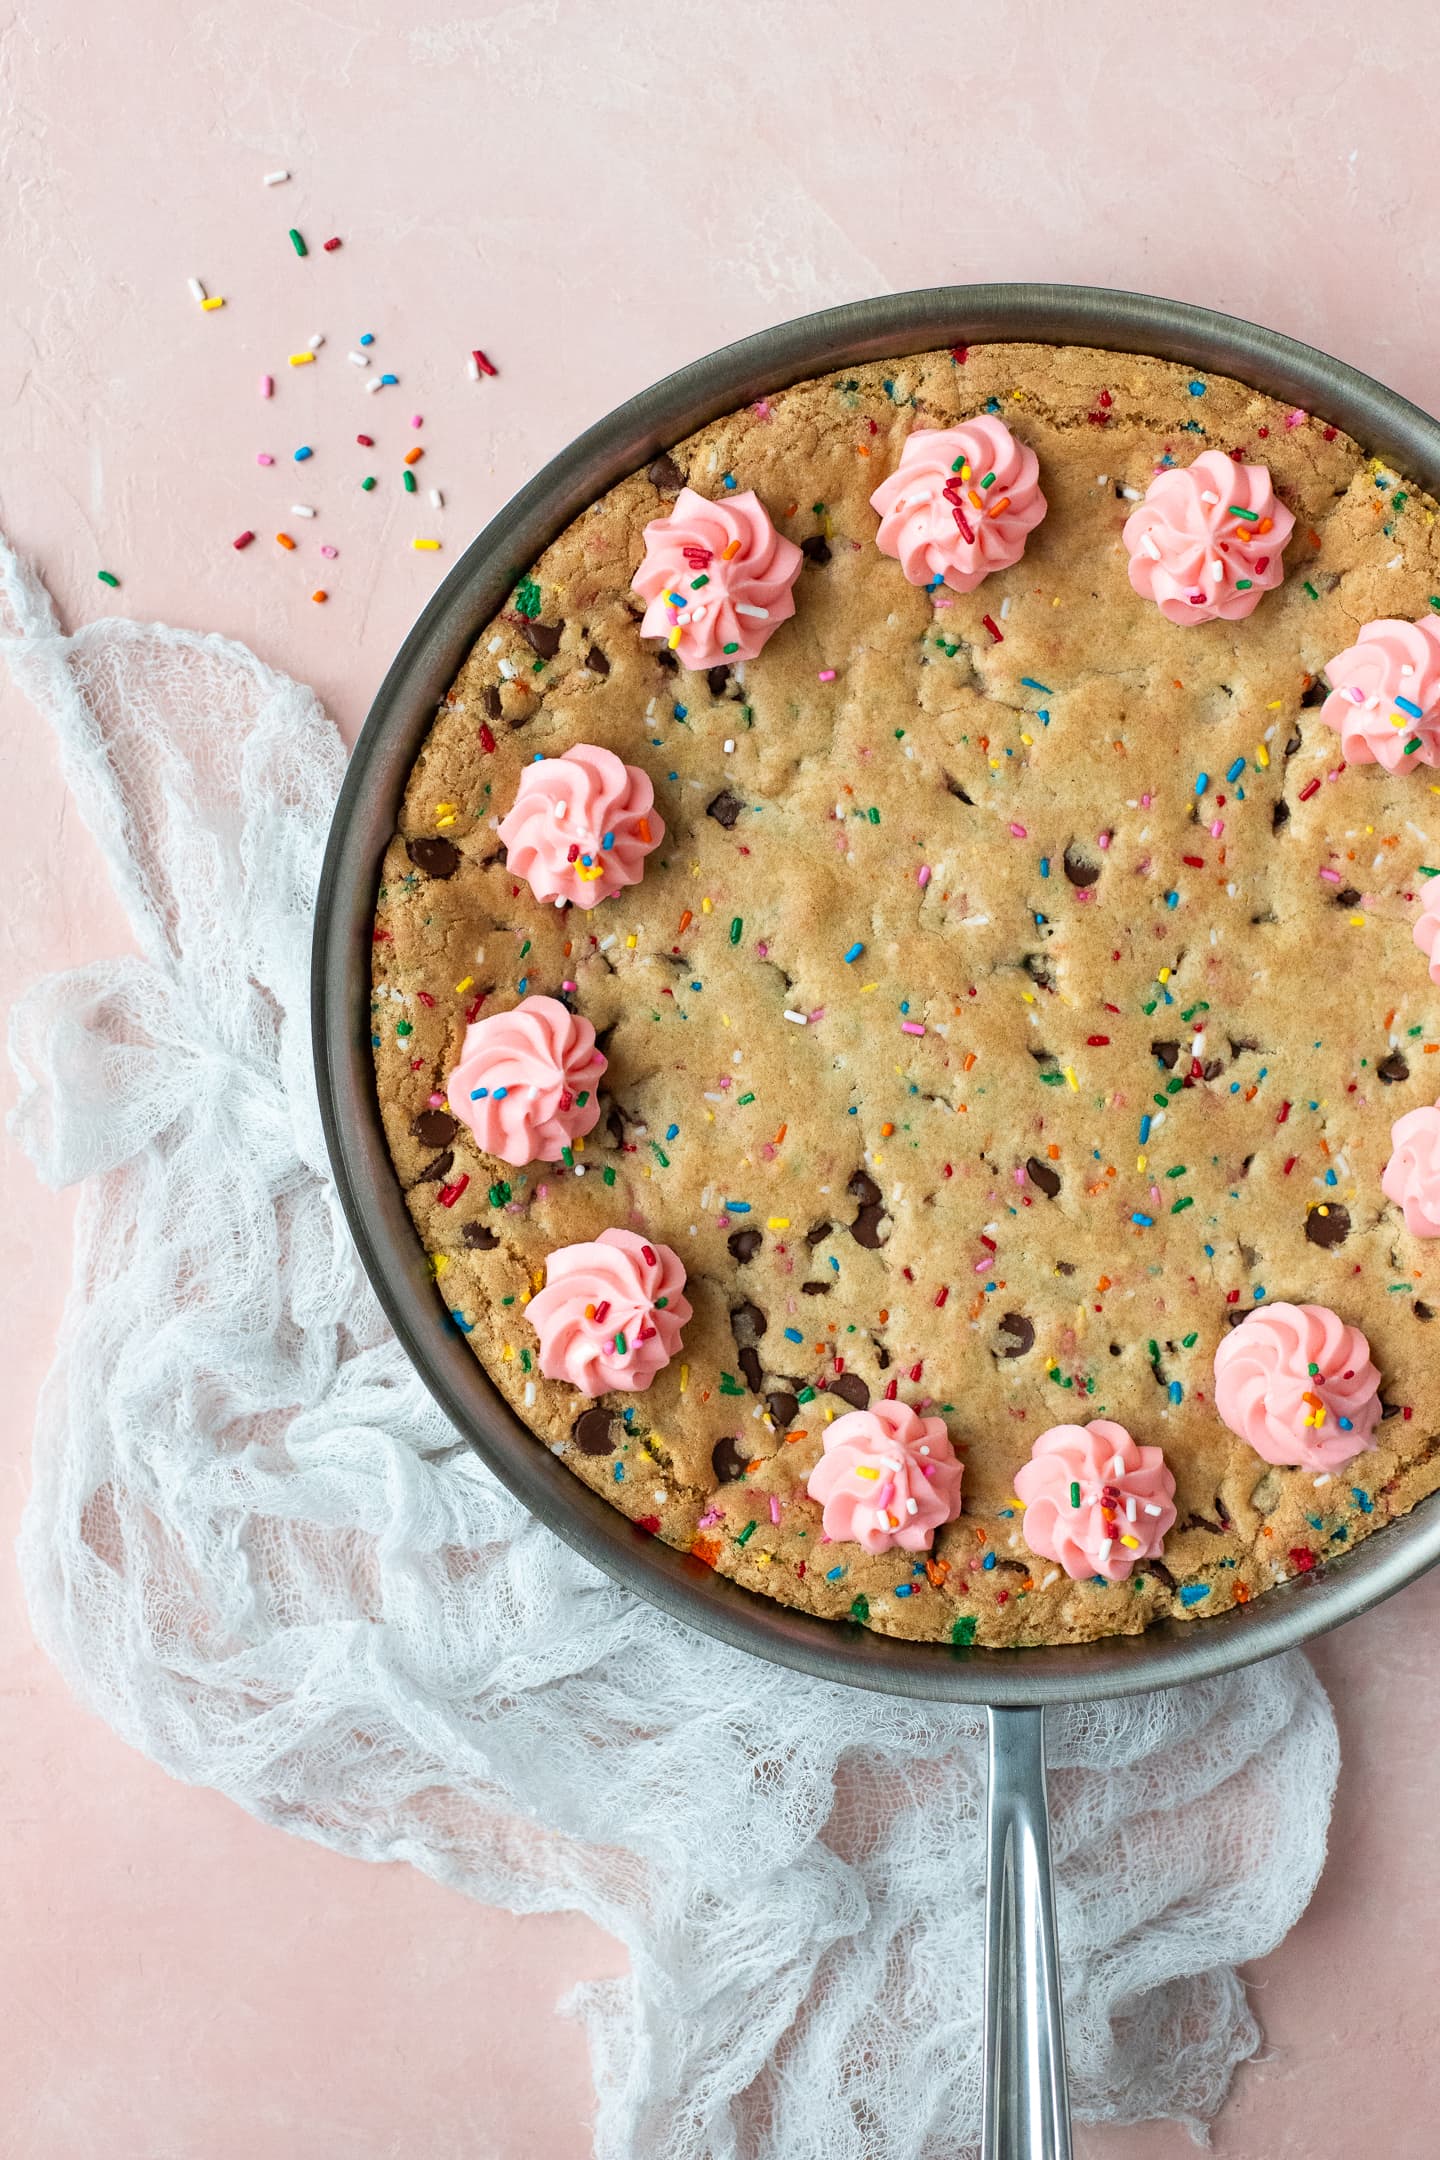 Overhead view of a chocolate chip cookie cake with a white linen to the side, over a light pink backdrop.